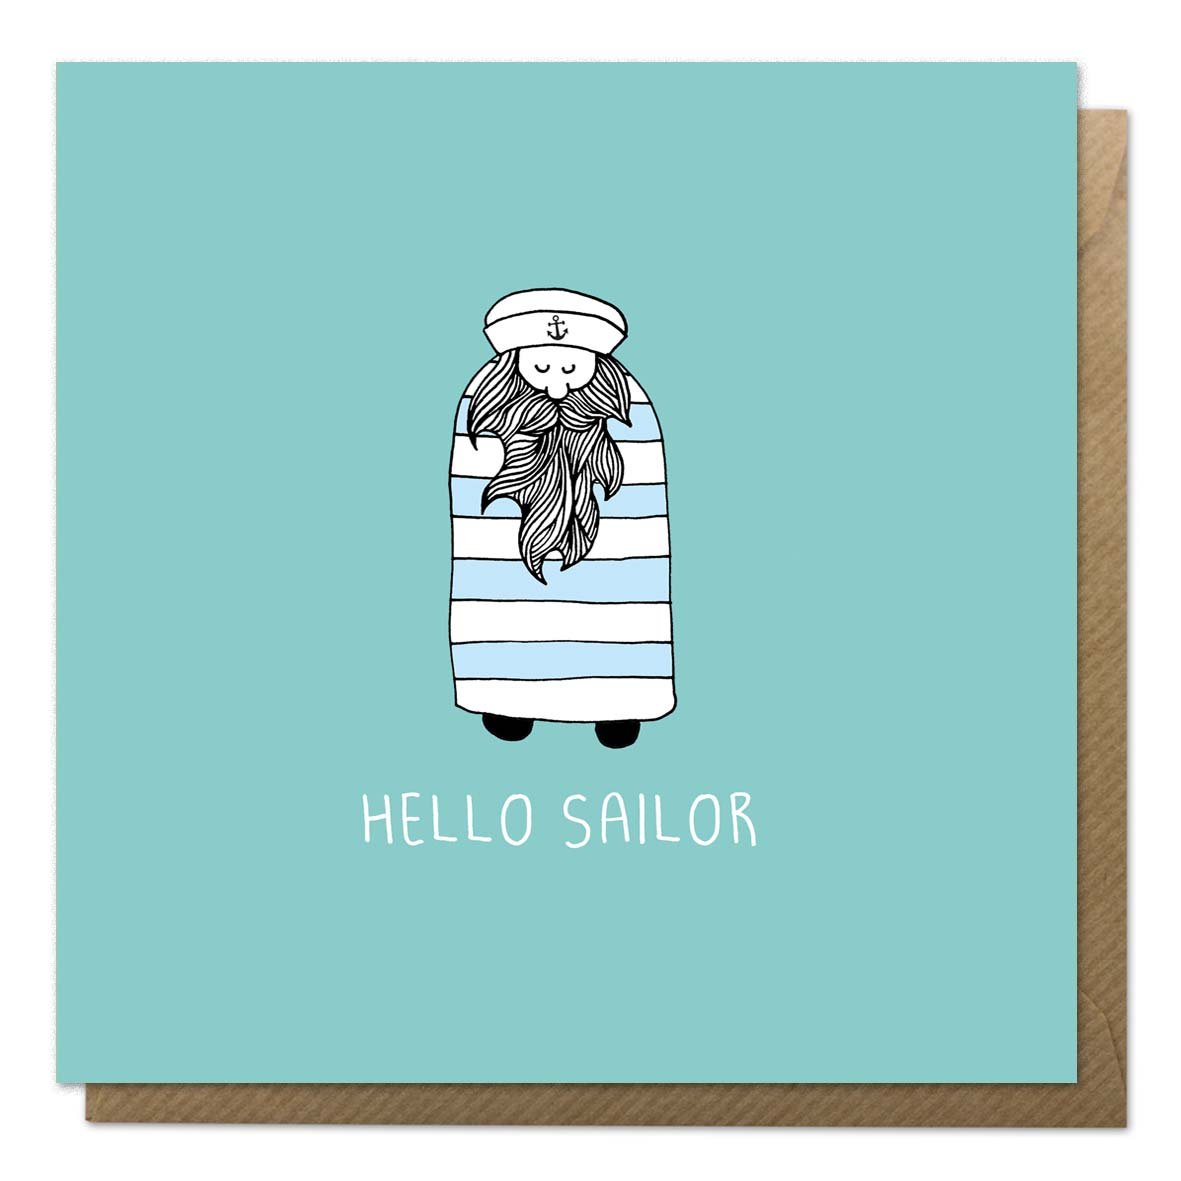 Blue greeting card with an illustration of a sailor